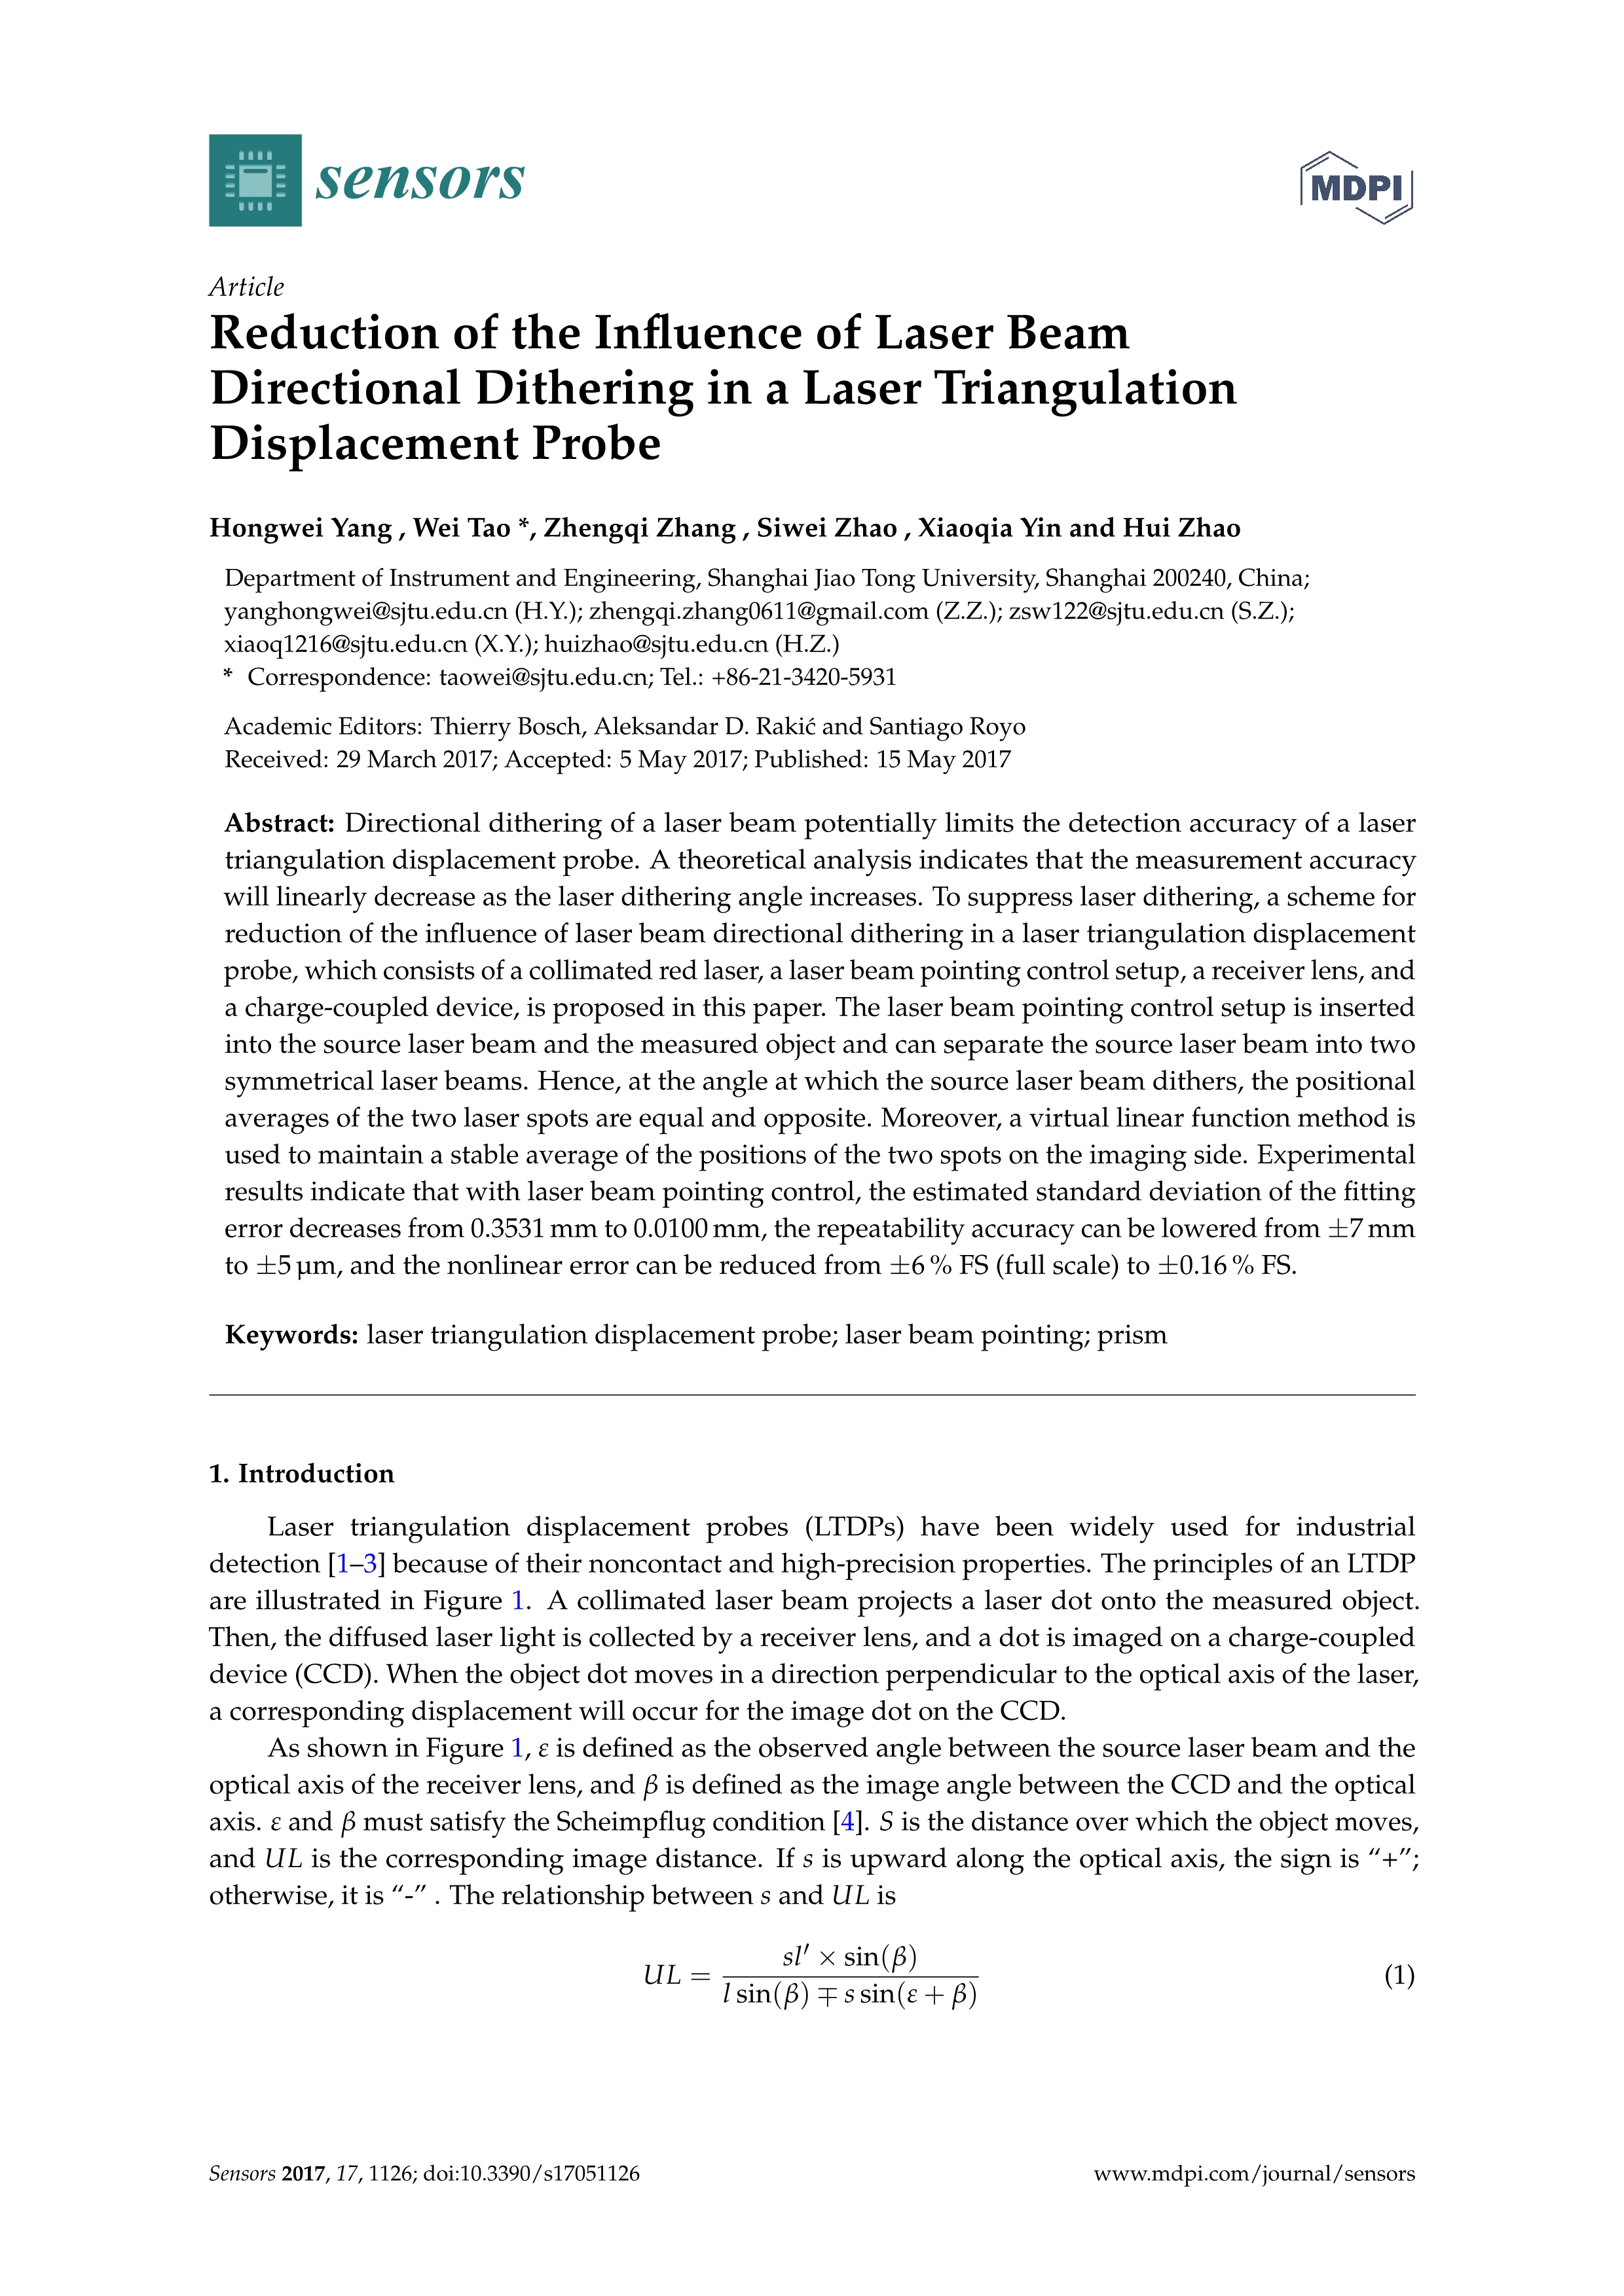 05 SCI论文-Reduction of the Influence of Laser Beam Directional Dithering in a Laser Triangulation Displacement Probe